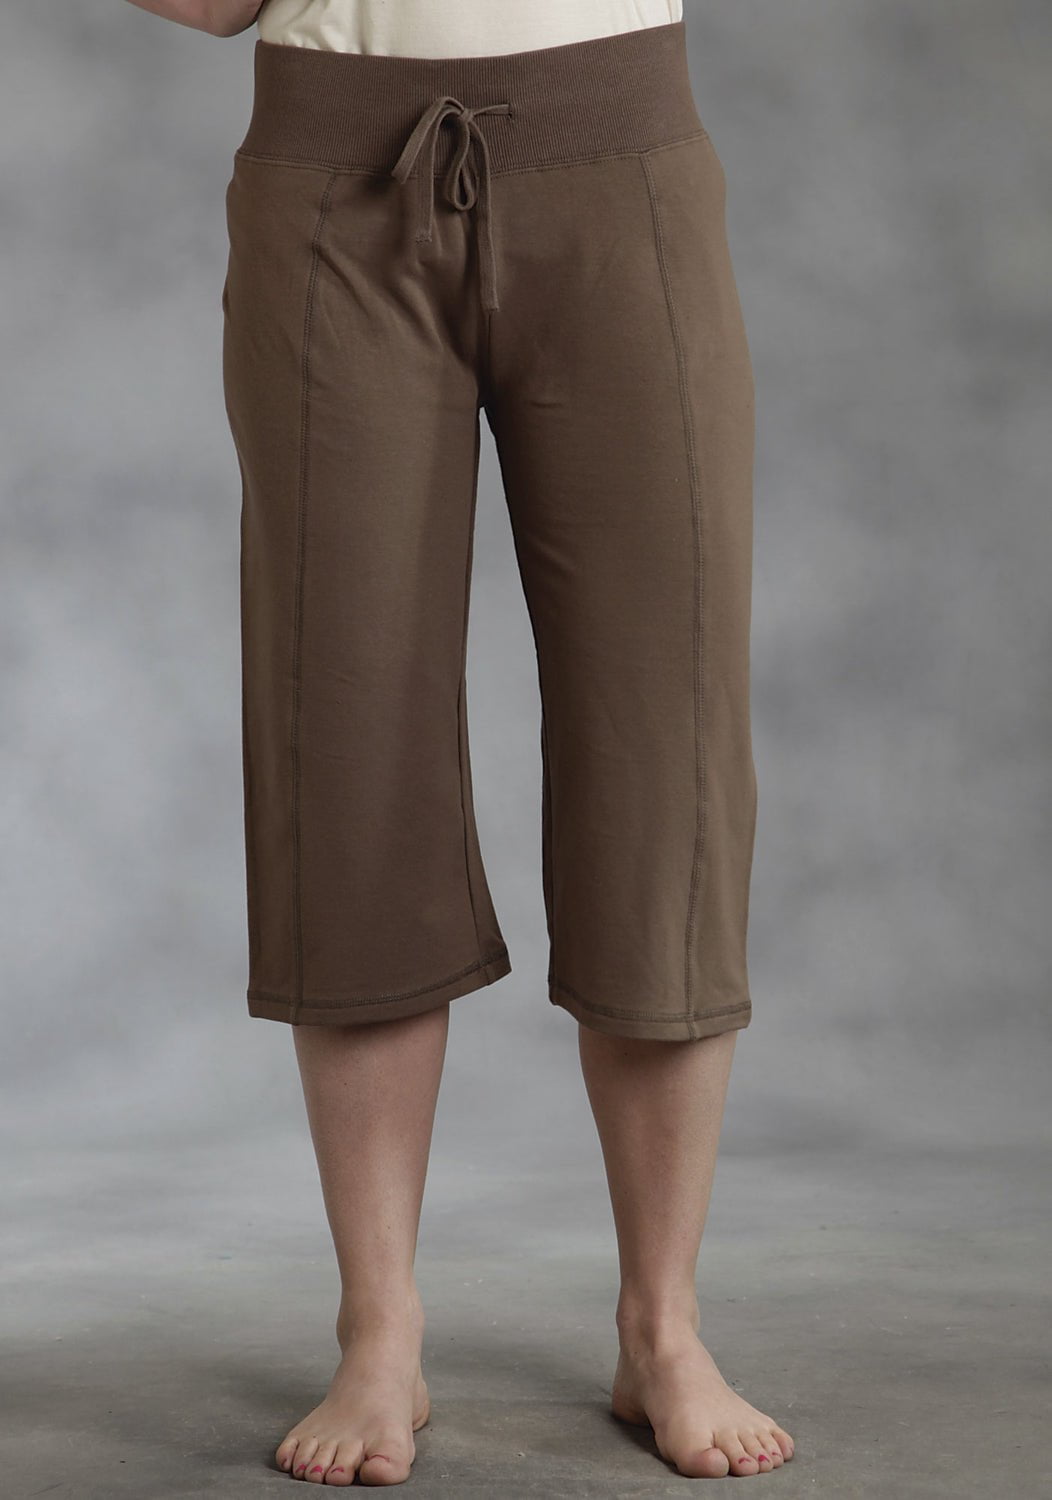 Roper Womens Solid Knit Brown 100% Cotton Capri Pants – The Western Company